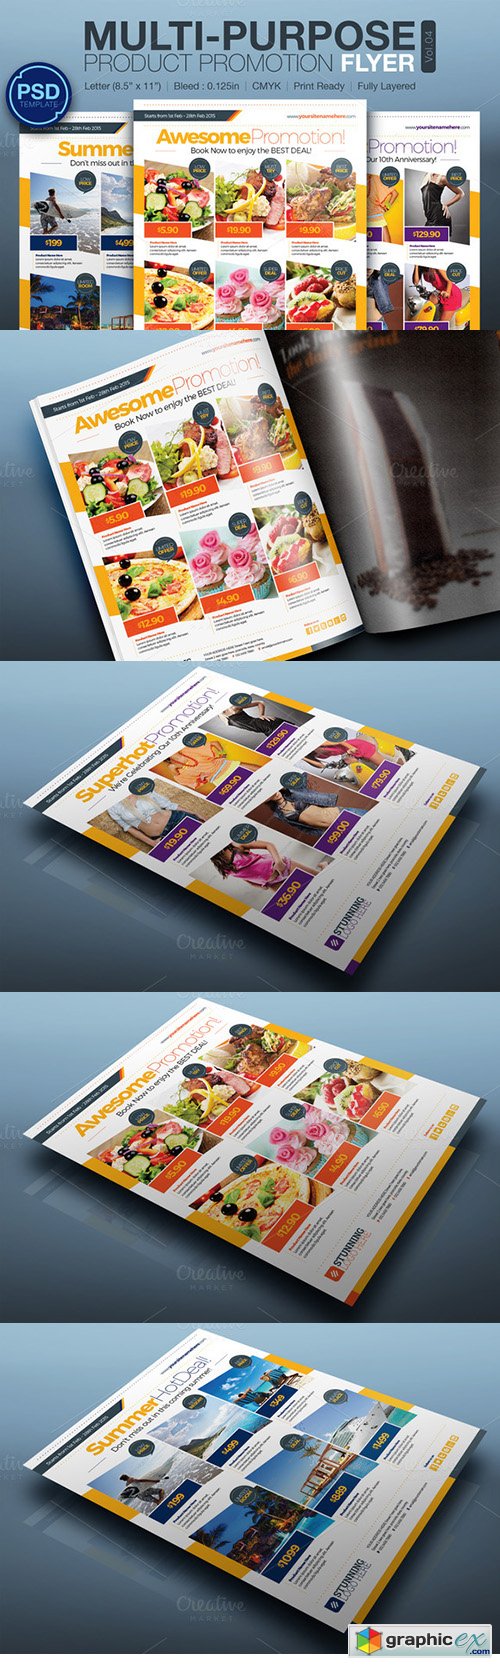 Multipurpose Product Promotion Flyer 155547